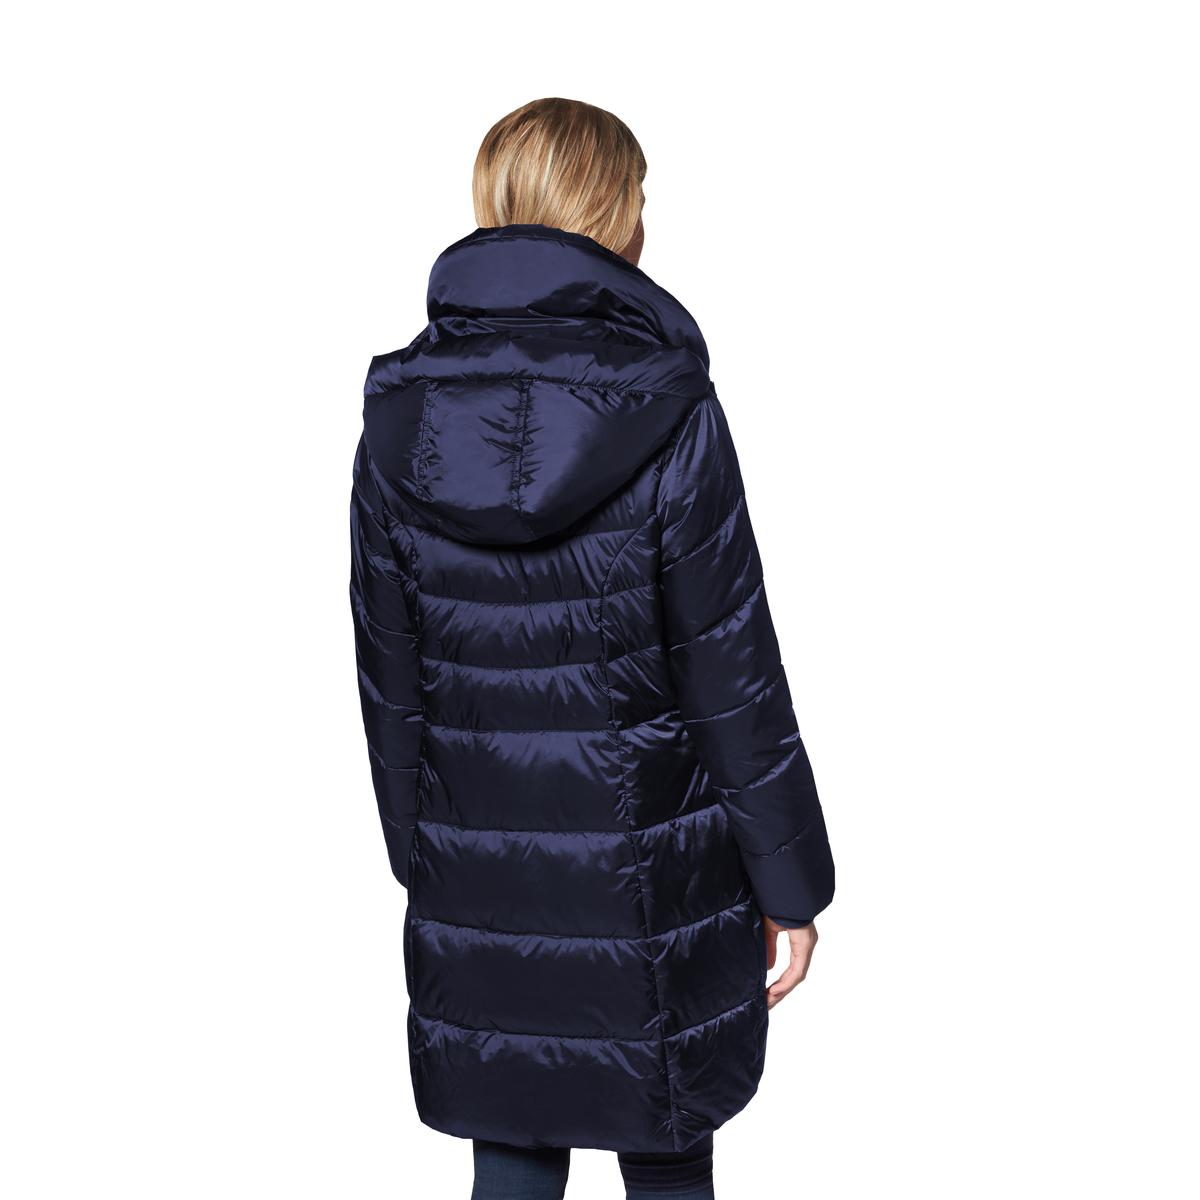 Steve Madden Puffer Coat for Women-Quilted Winter Jacket with Pillow ...